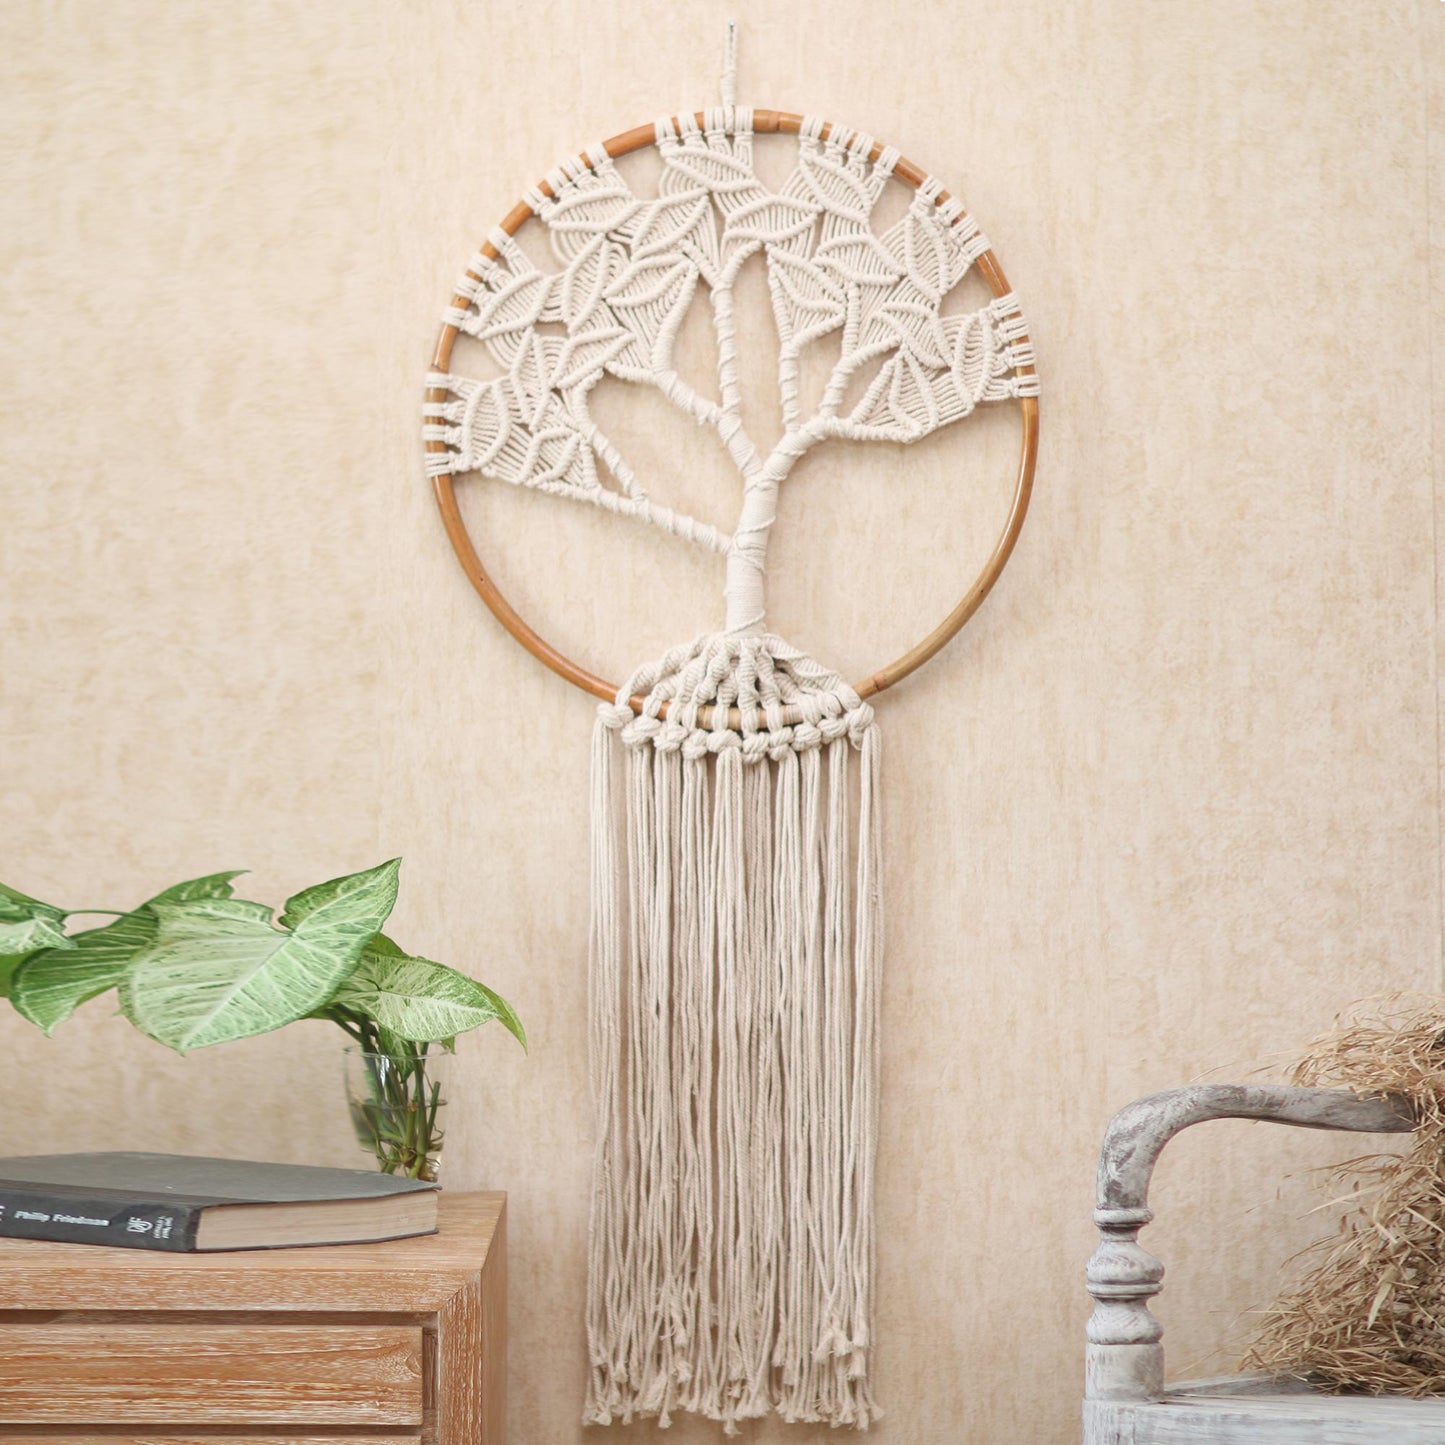 Deep Roots, Strong Branches Handcrafted Ivory Macrame Tree Wall Hanging